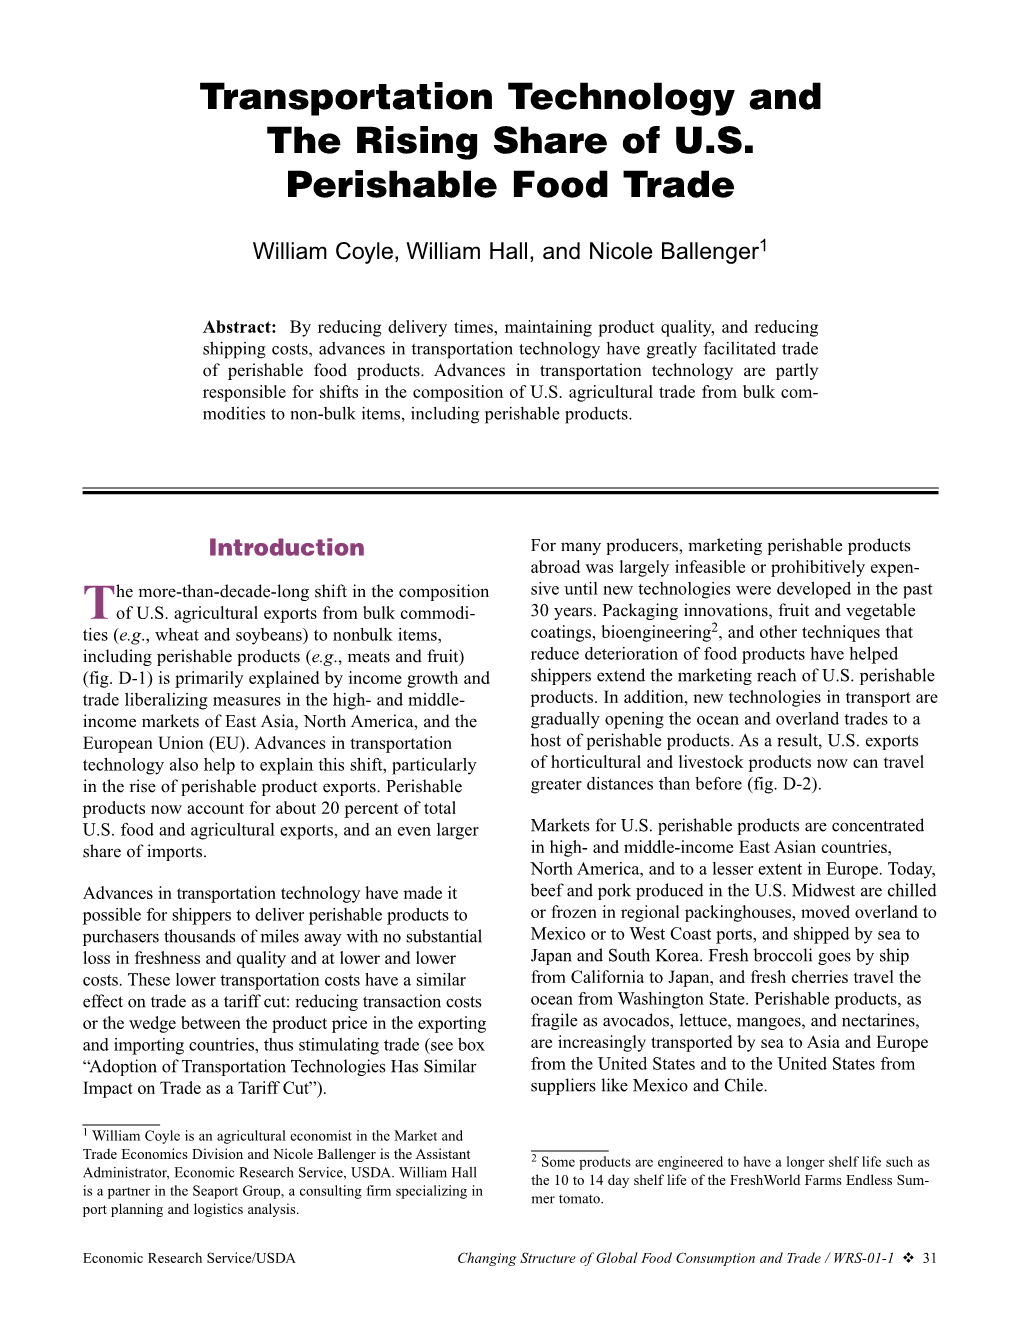 Transportation Technology and the Rising Share of U.S. Perishable Food Trade